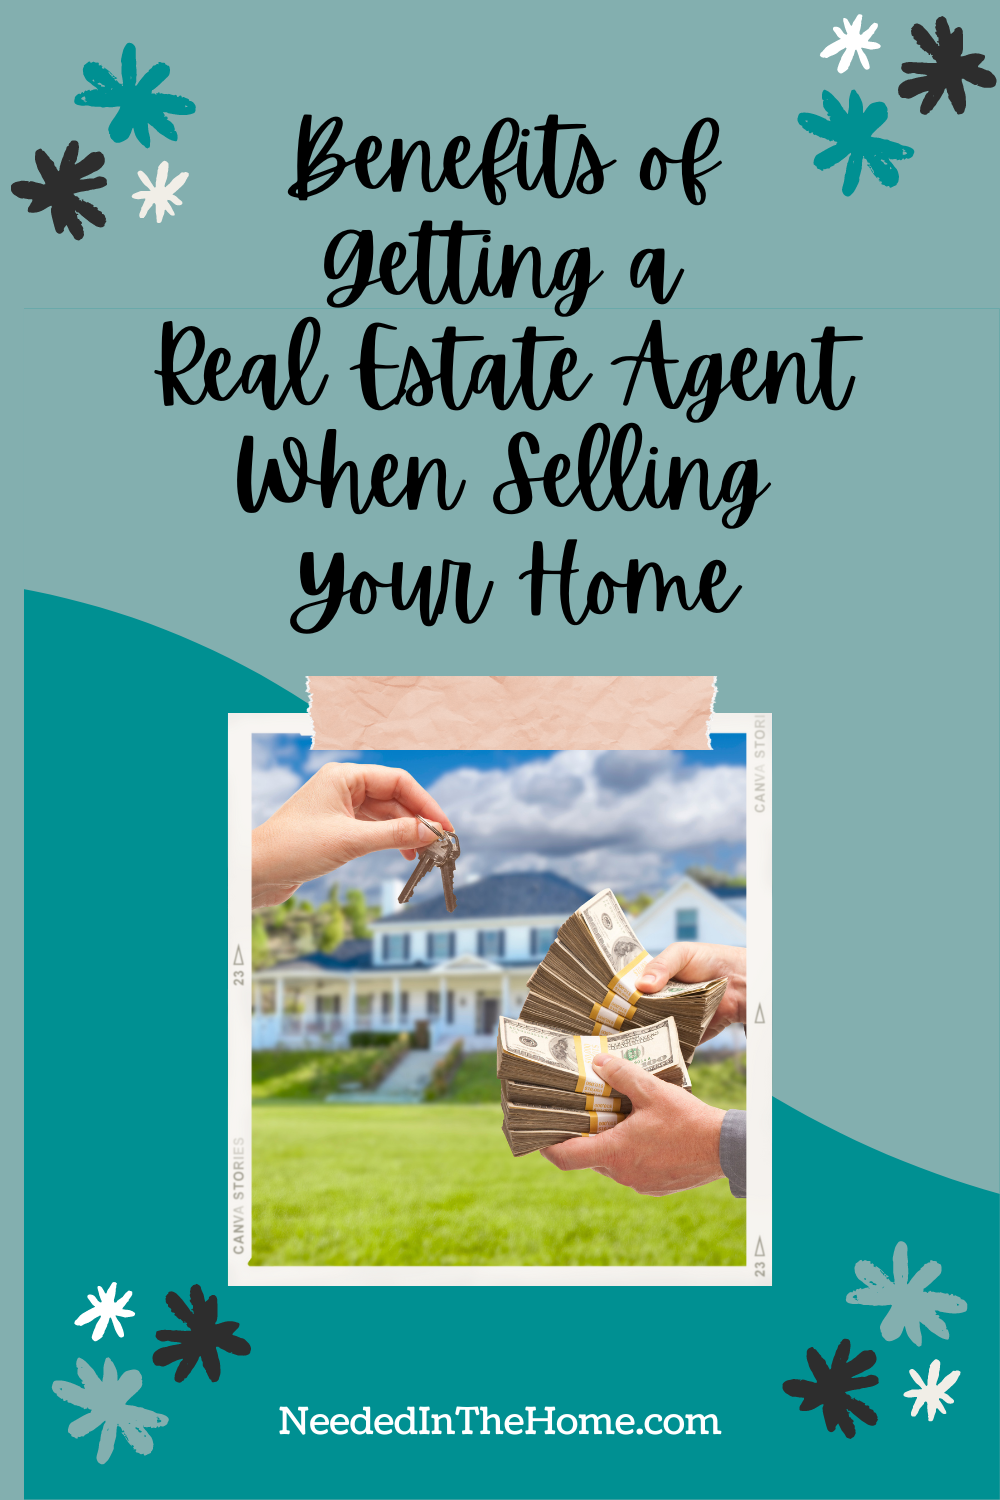 pinterest-pin-description benefits of getting a real estate agent when selling your home hand with keys hands with wads of hundred dollar bills house in background neededinthehome